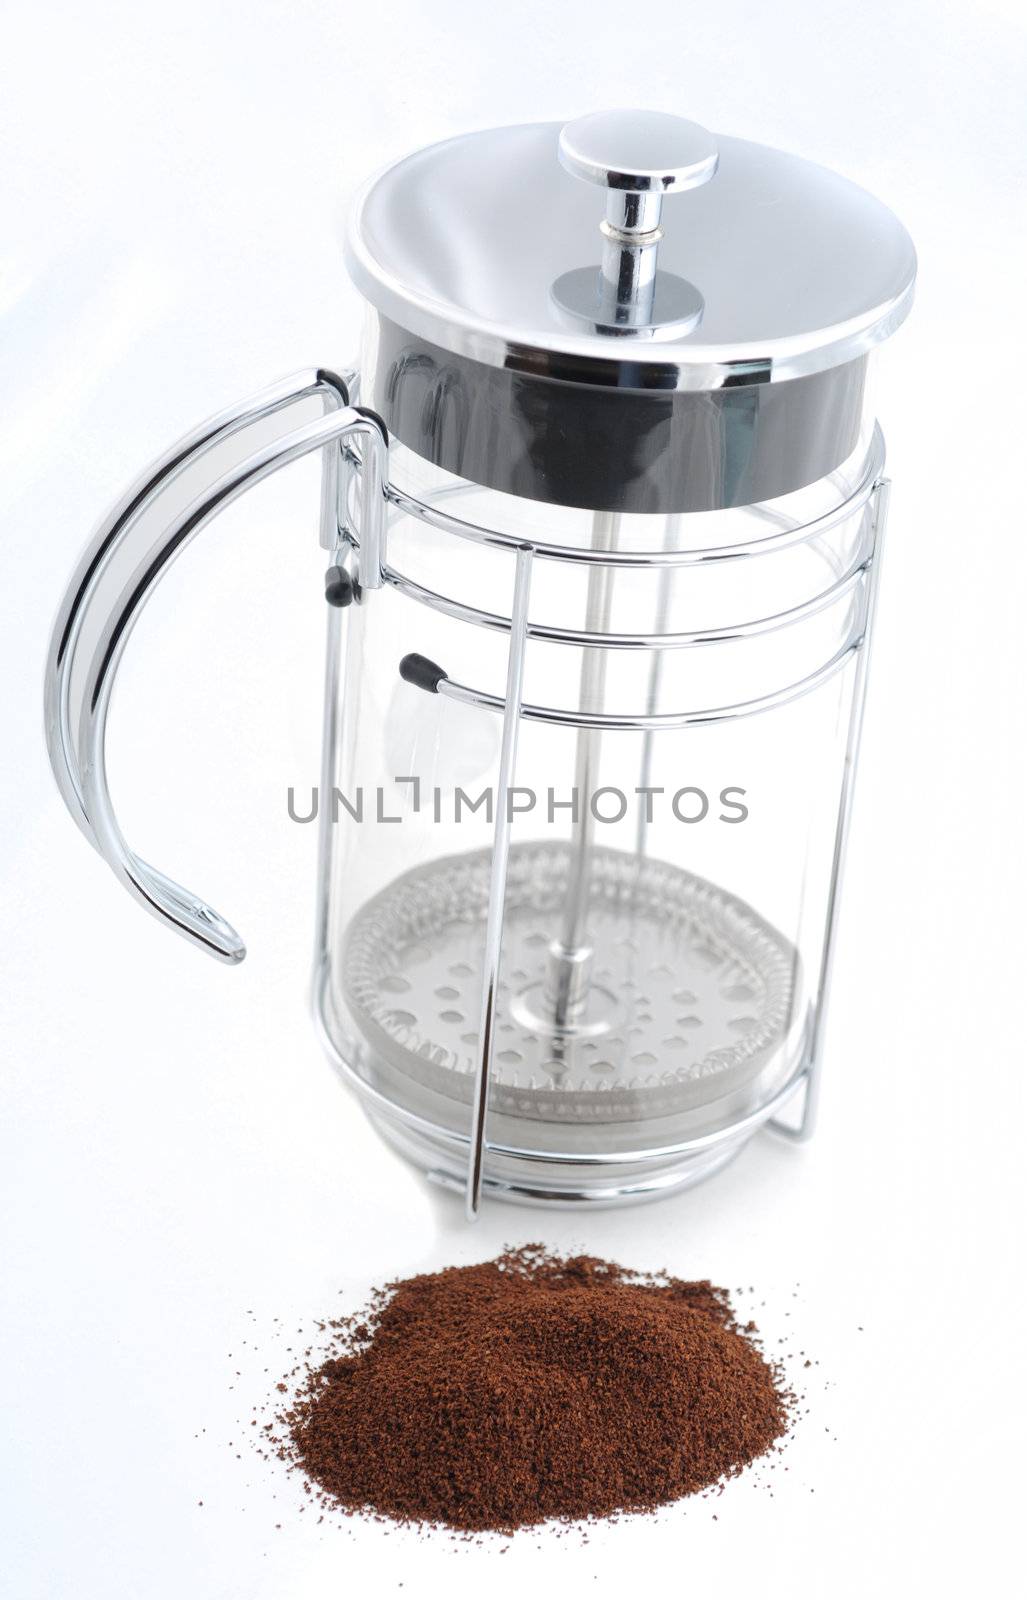 Coffee press with ground coffee by ftlaudgirl